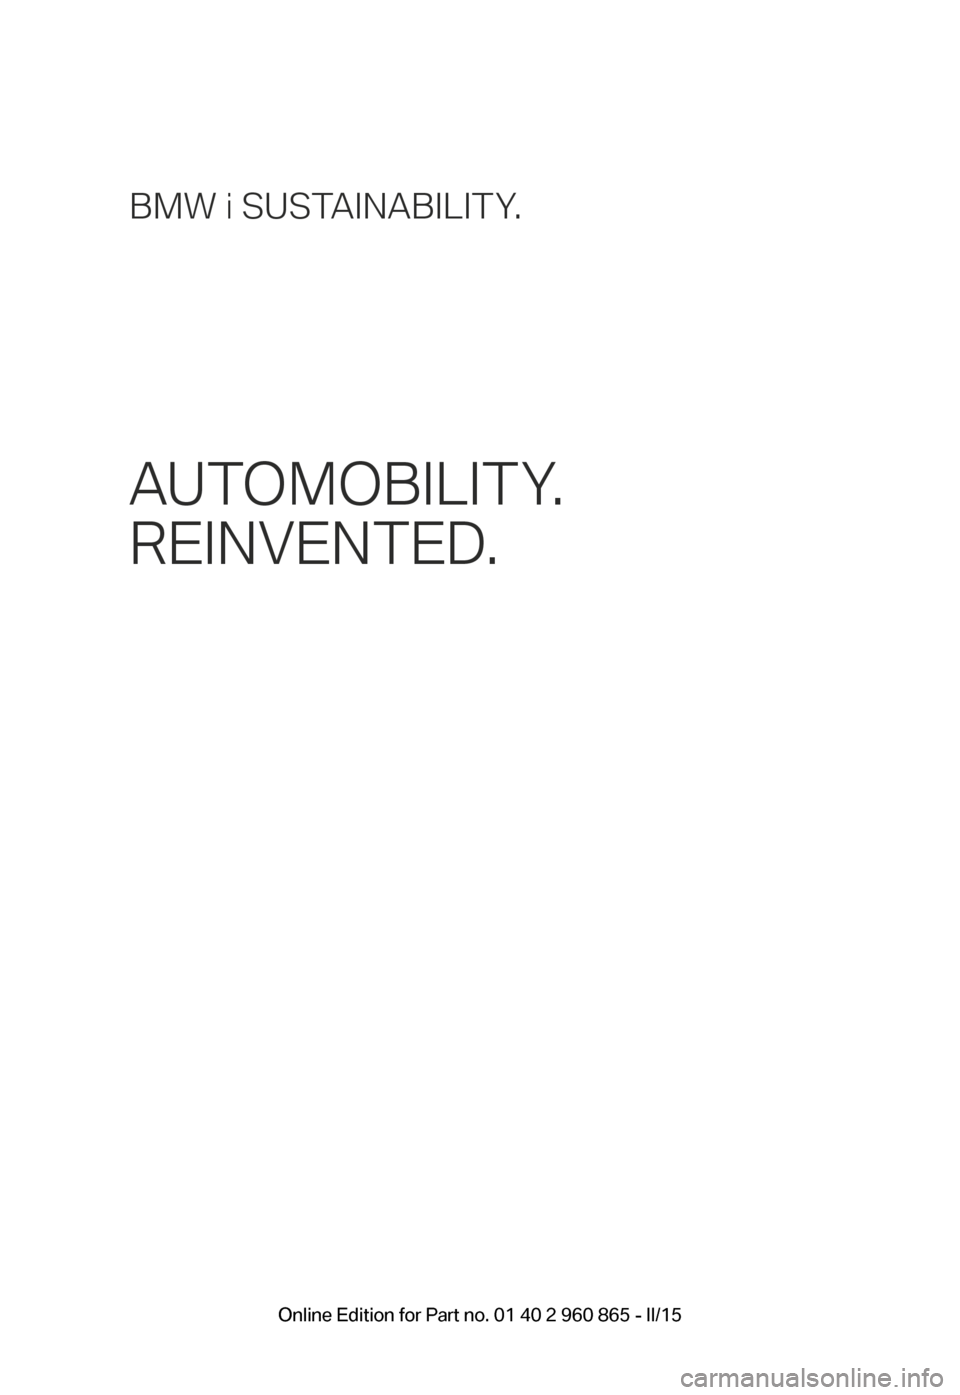 BMW I3 2015 I01 Owners Manual BMW i SUSTAINABILITY.
AUTOMOBILITY. 
REINVENTED.
BMW_i3_Bedienungseinleger_210x138mm_us_lektoriert_RZ.indd   122.01.14   15:19 Online Edition for Part no. 01 40 2 960 865 - II/15 